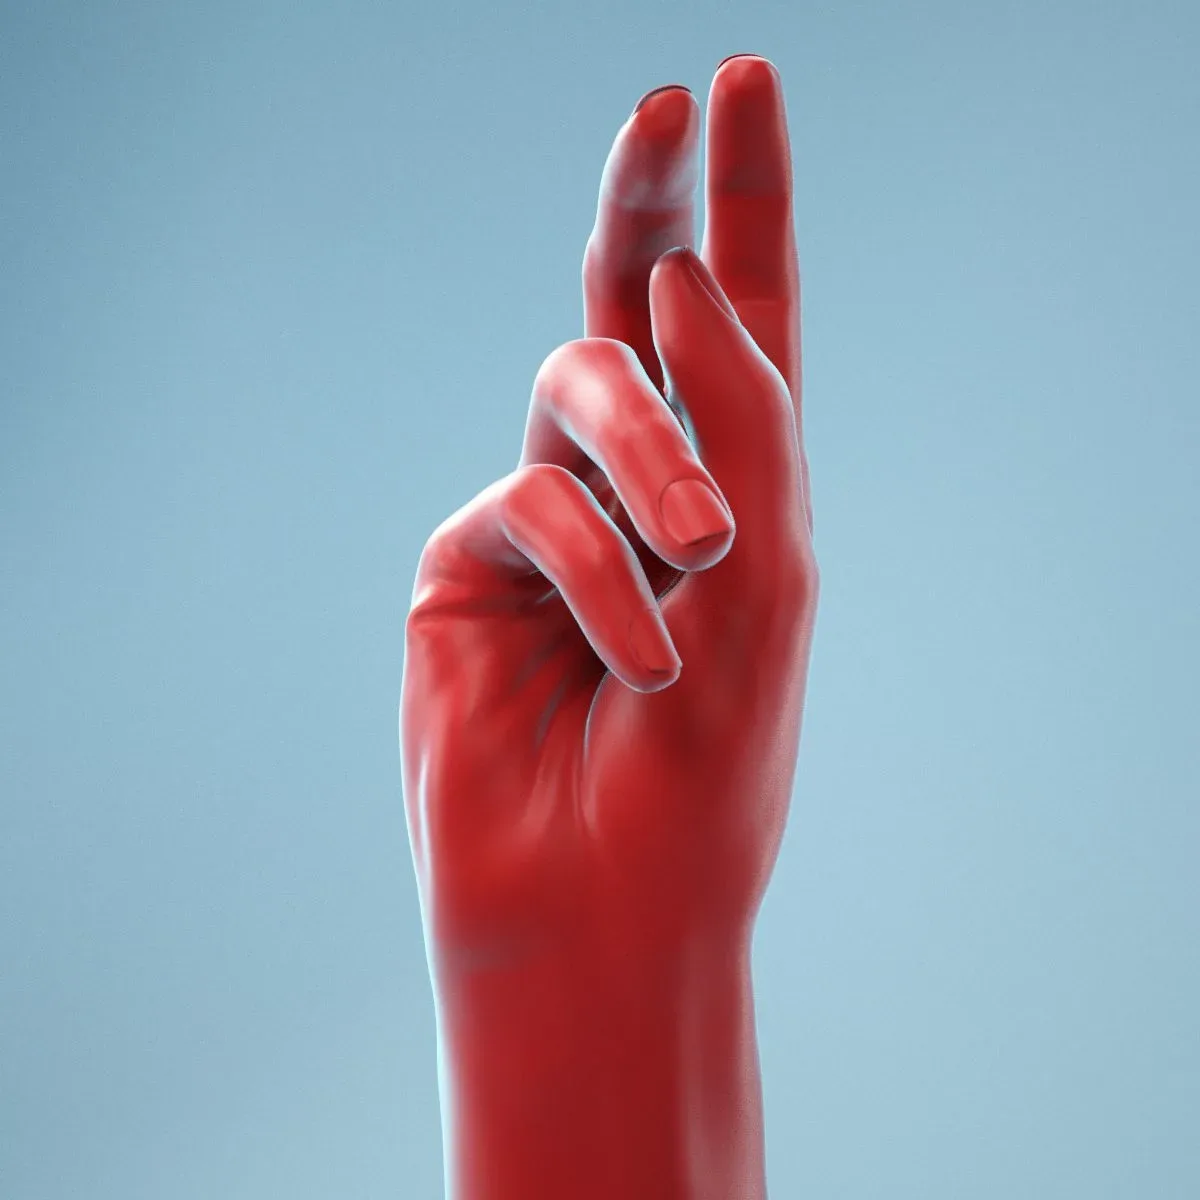 Relaxed Grip Realistic Hand